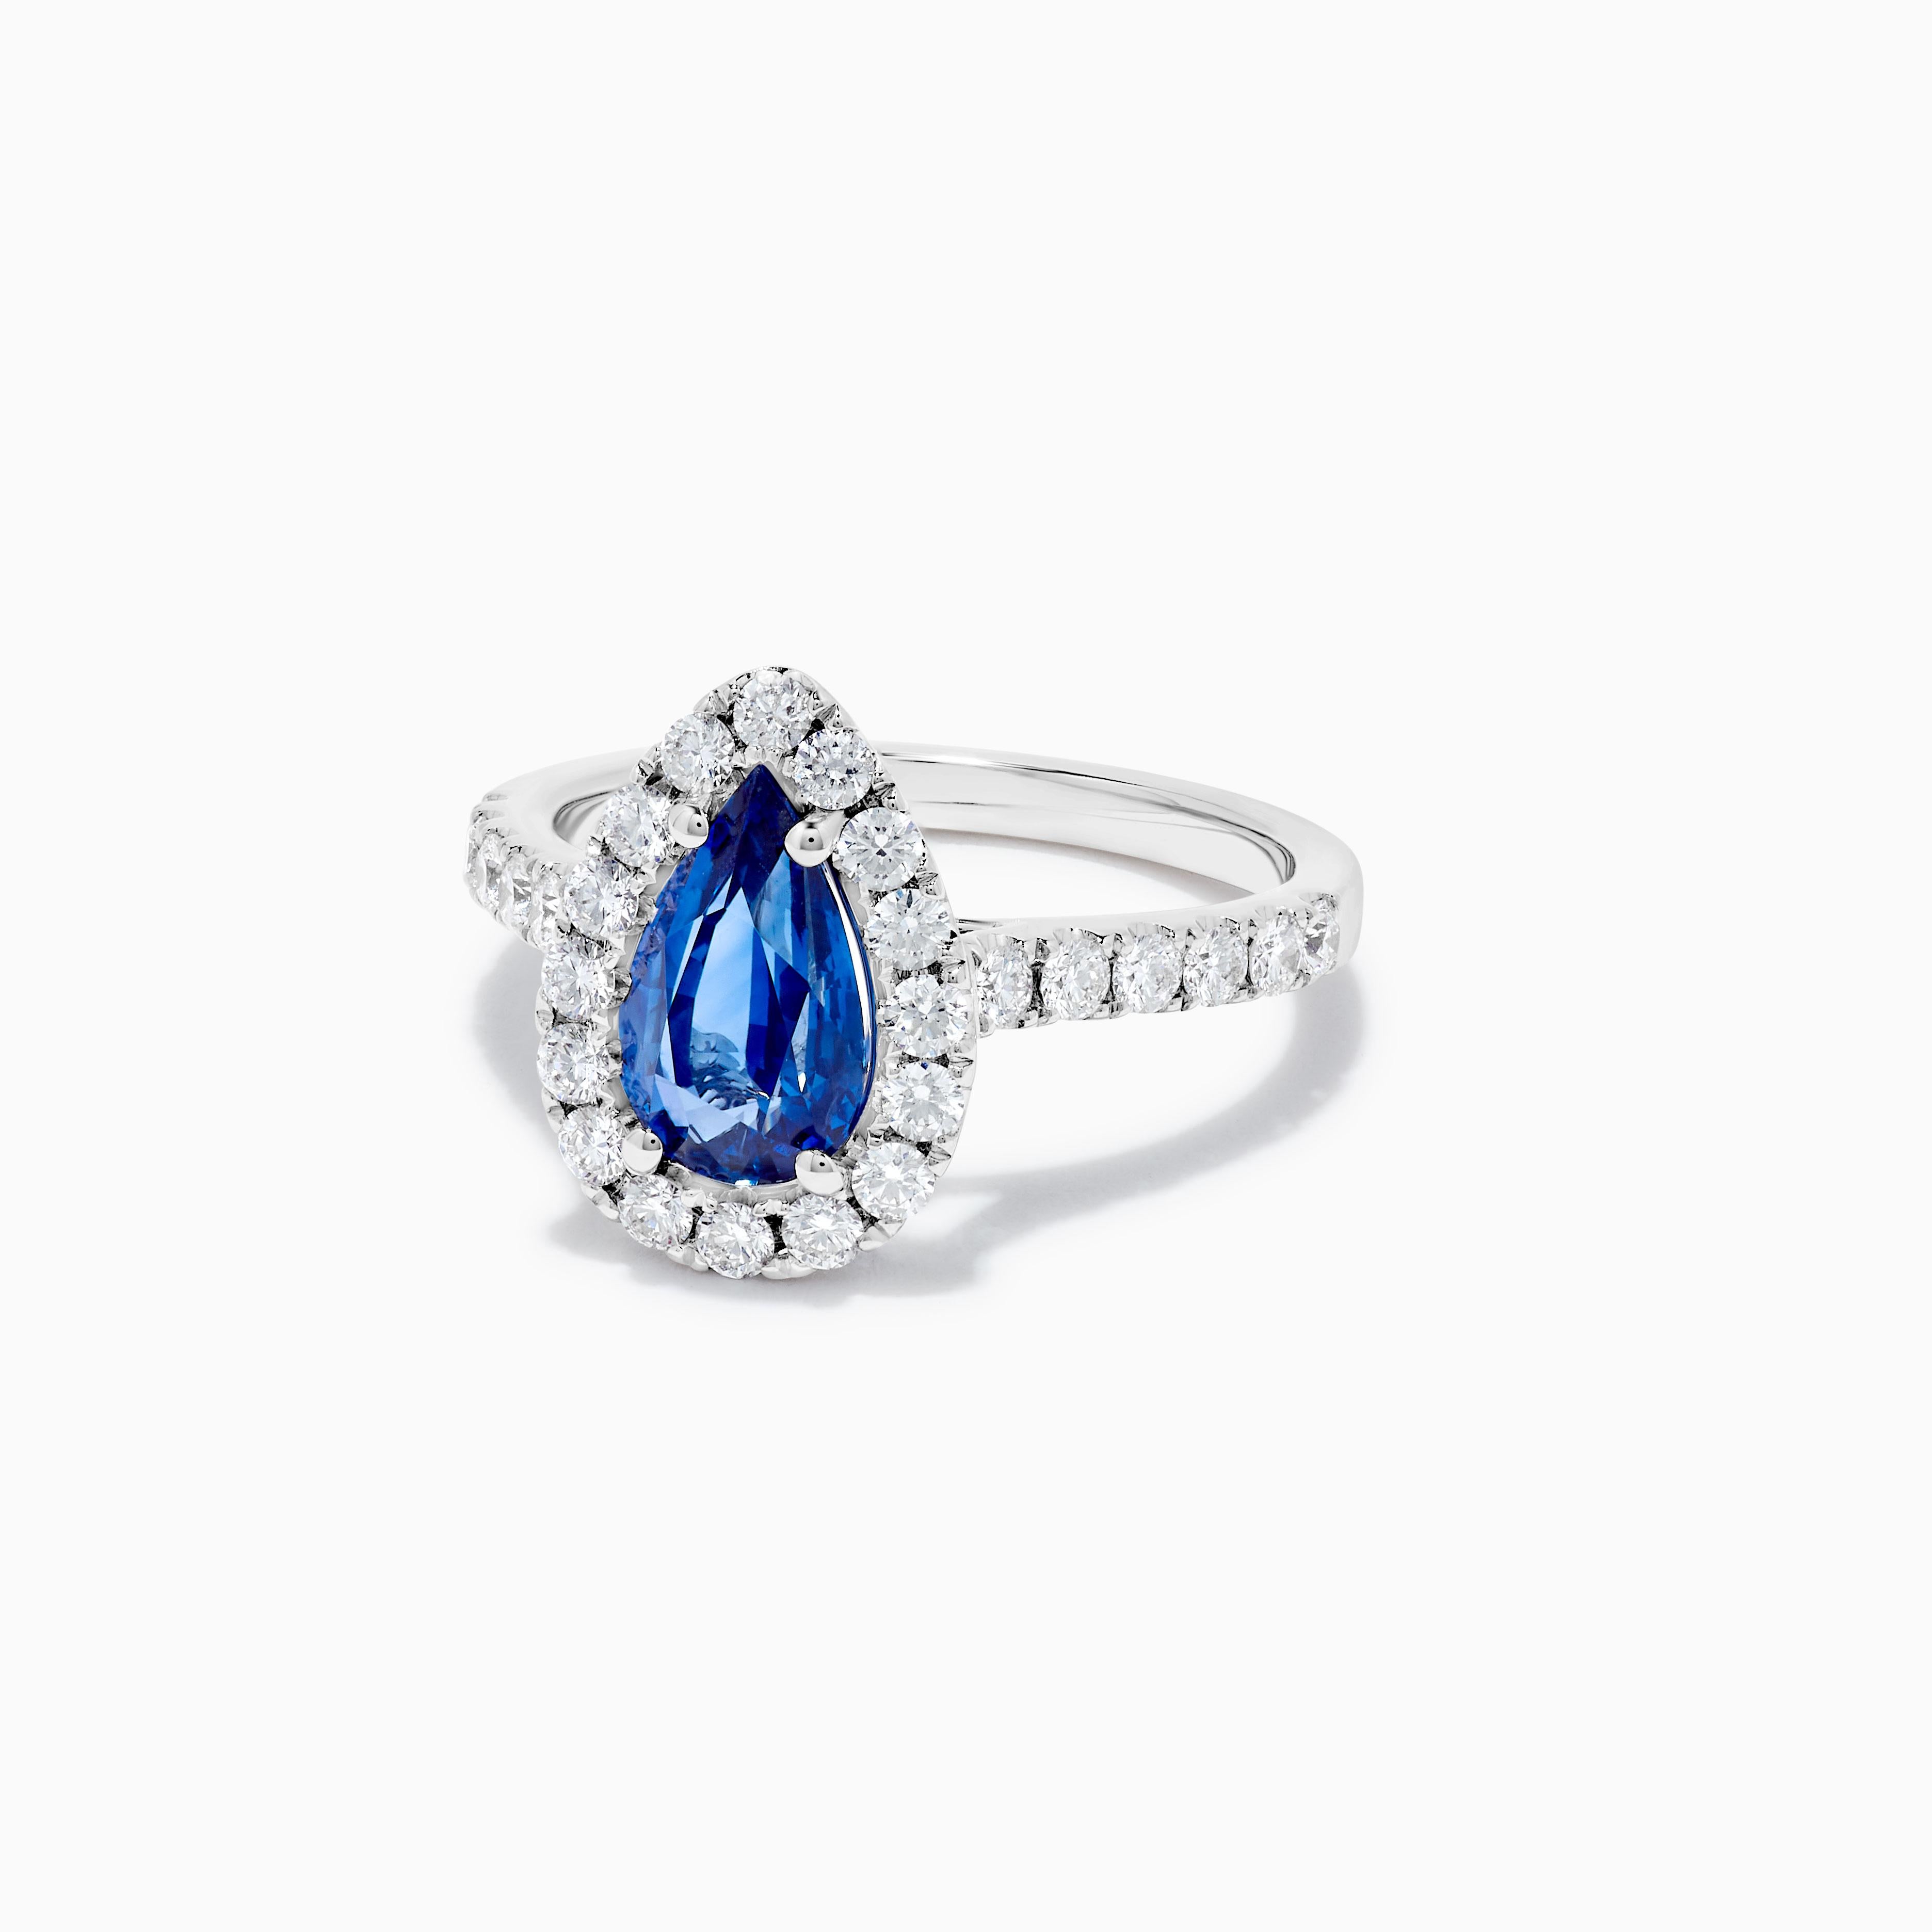 RareGemWorld's classic sapphire ring. Mounted in a beautiful 18K White Gold setting with a natural pear cut blue sapphire. The sapphire is surrounded by natural round white diamond melee. This ring is guaranteed to impress and enhance your personal